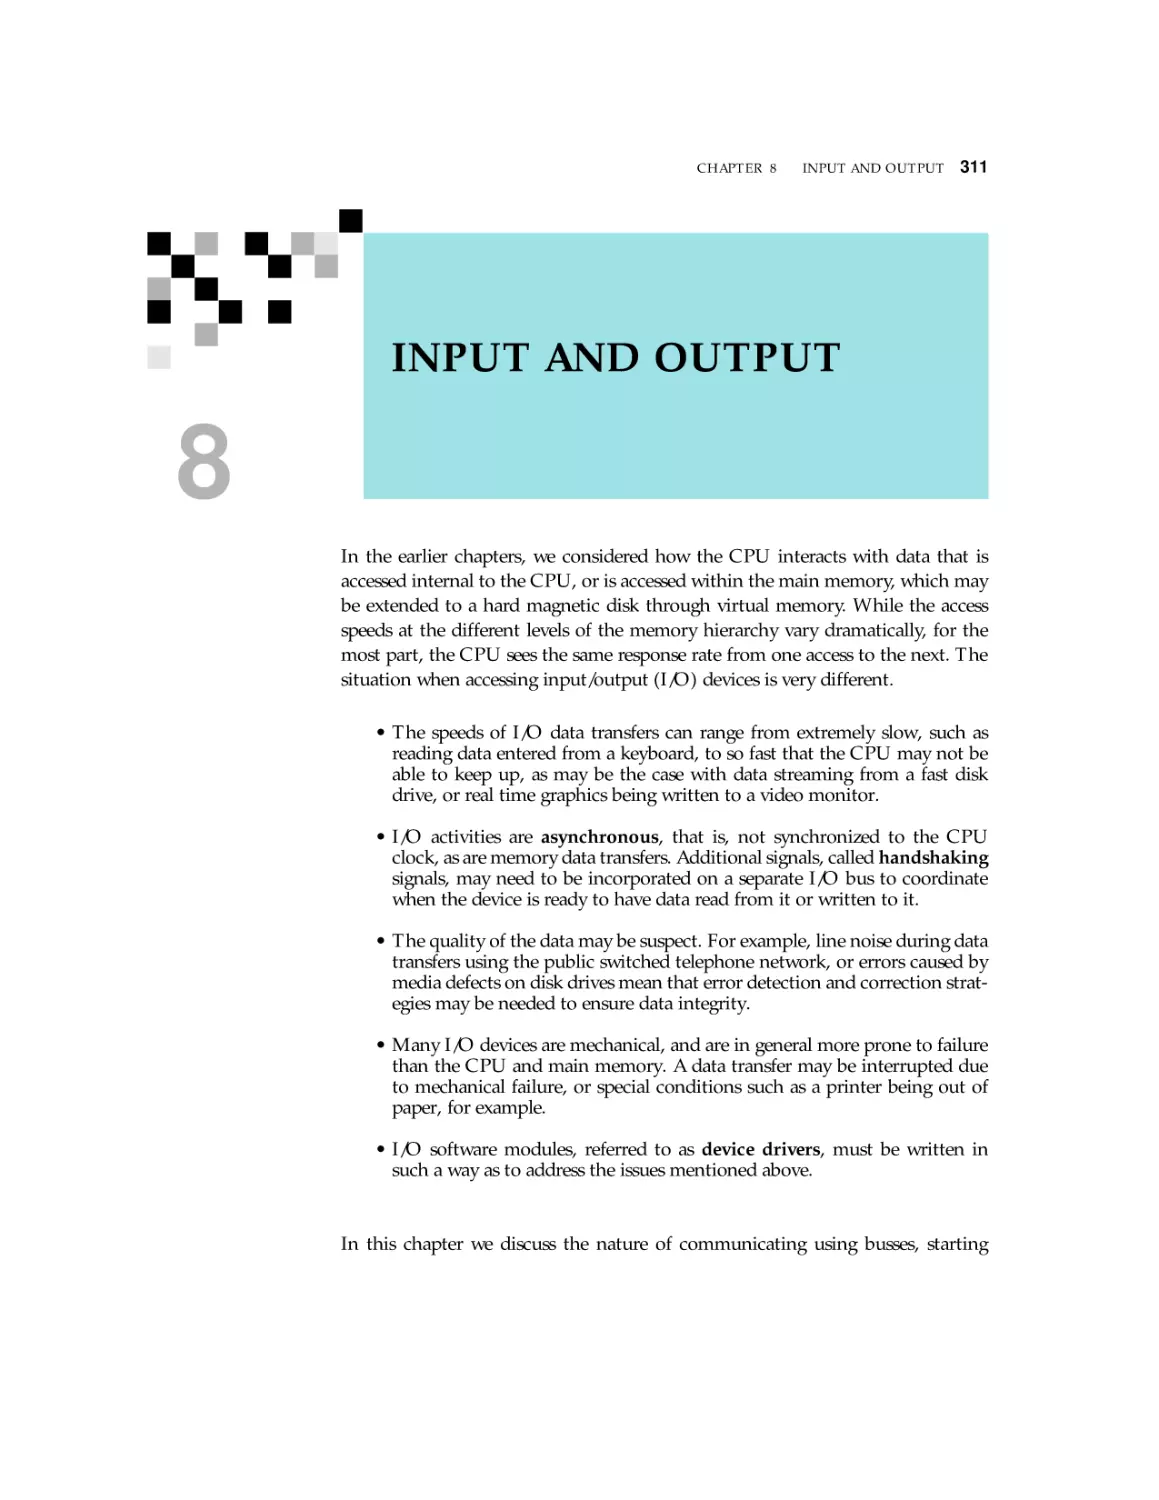 8. INPUT AND OUTPUT